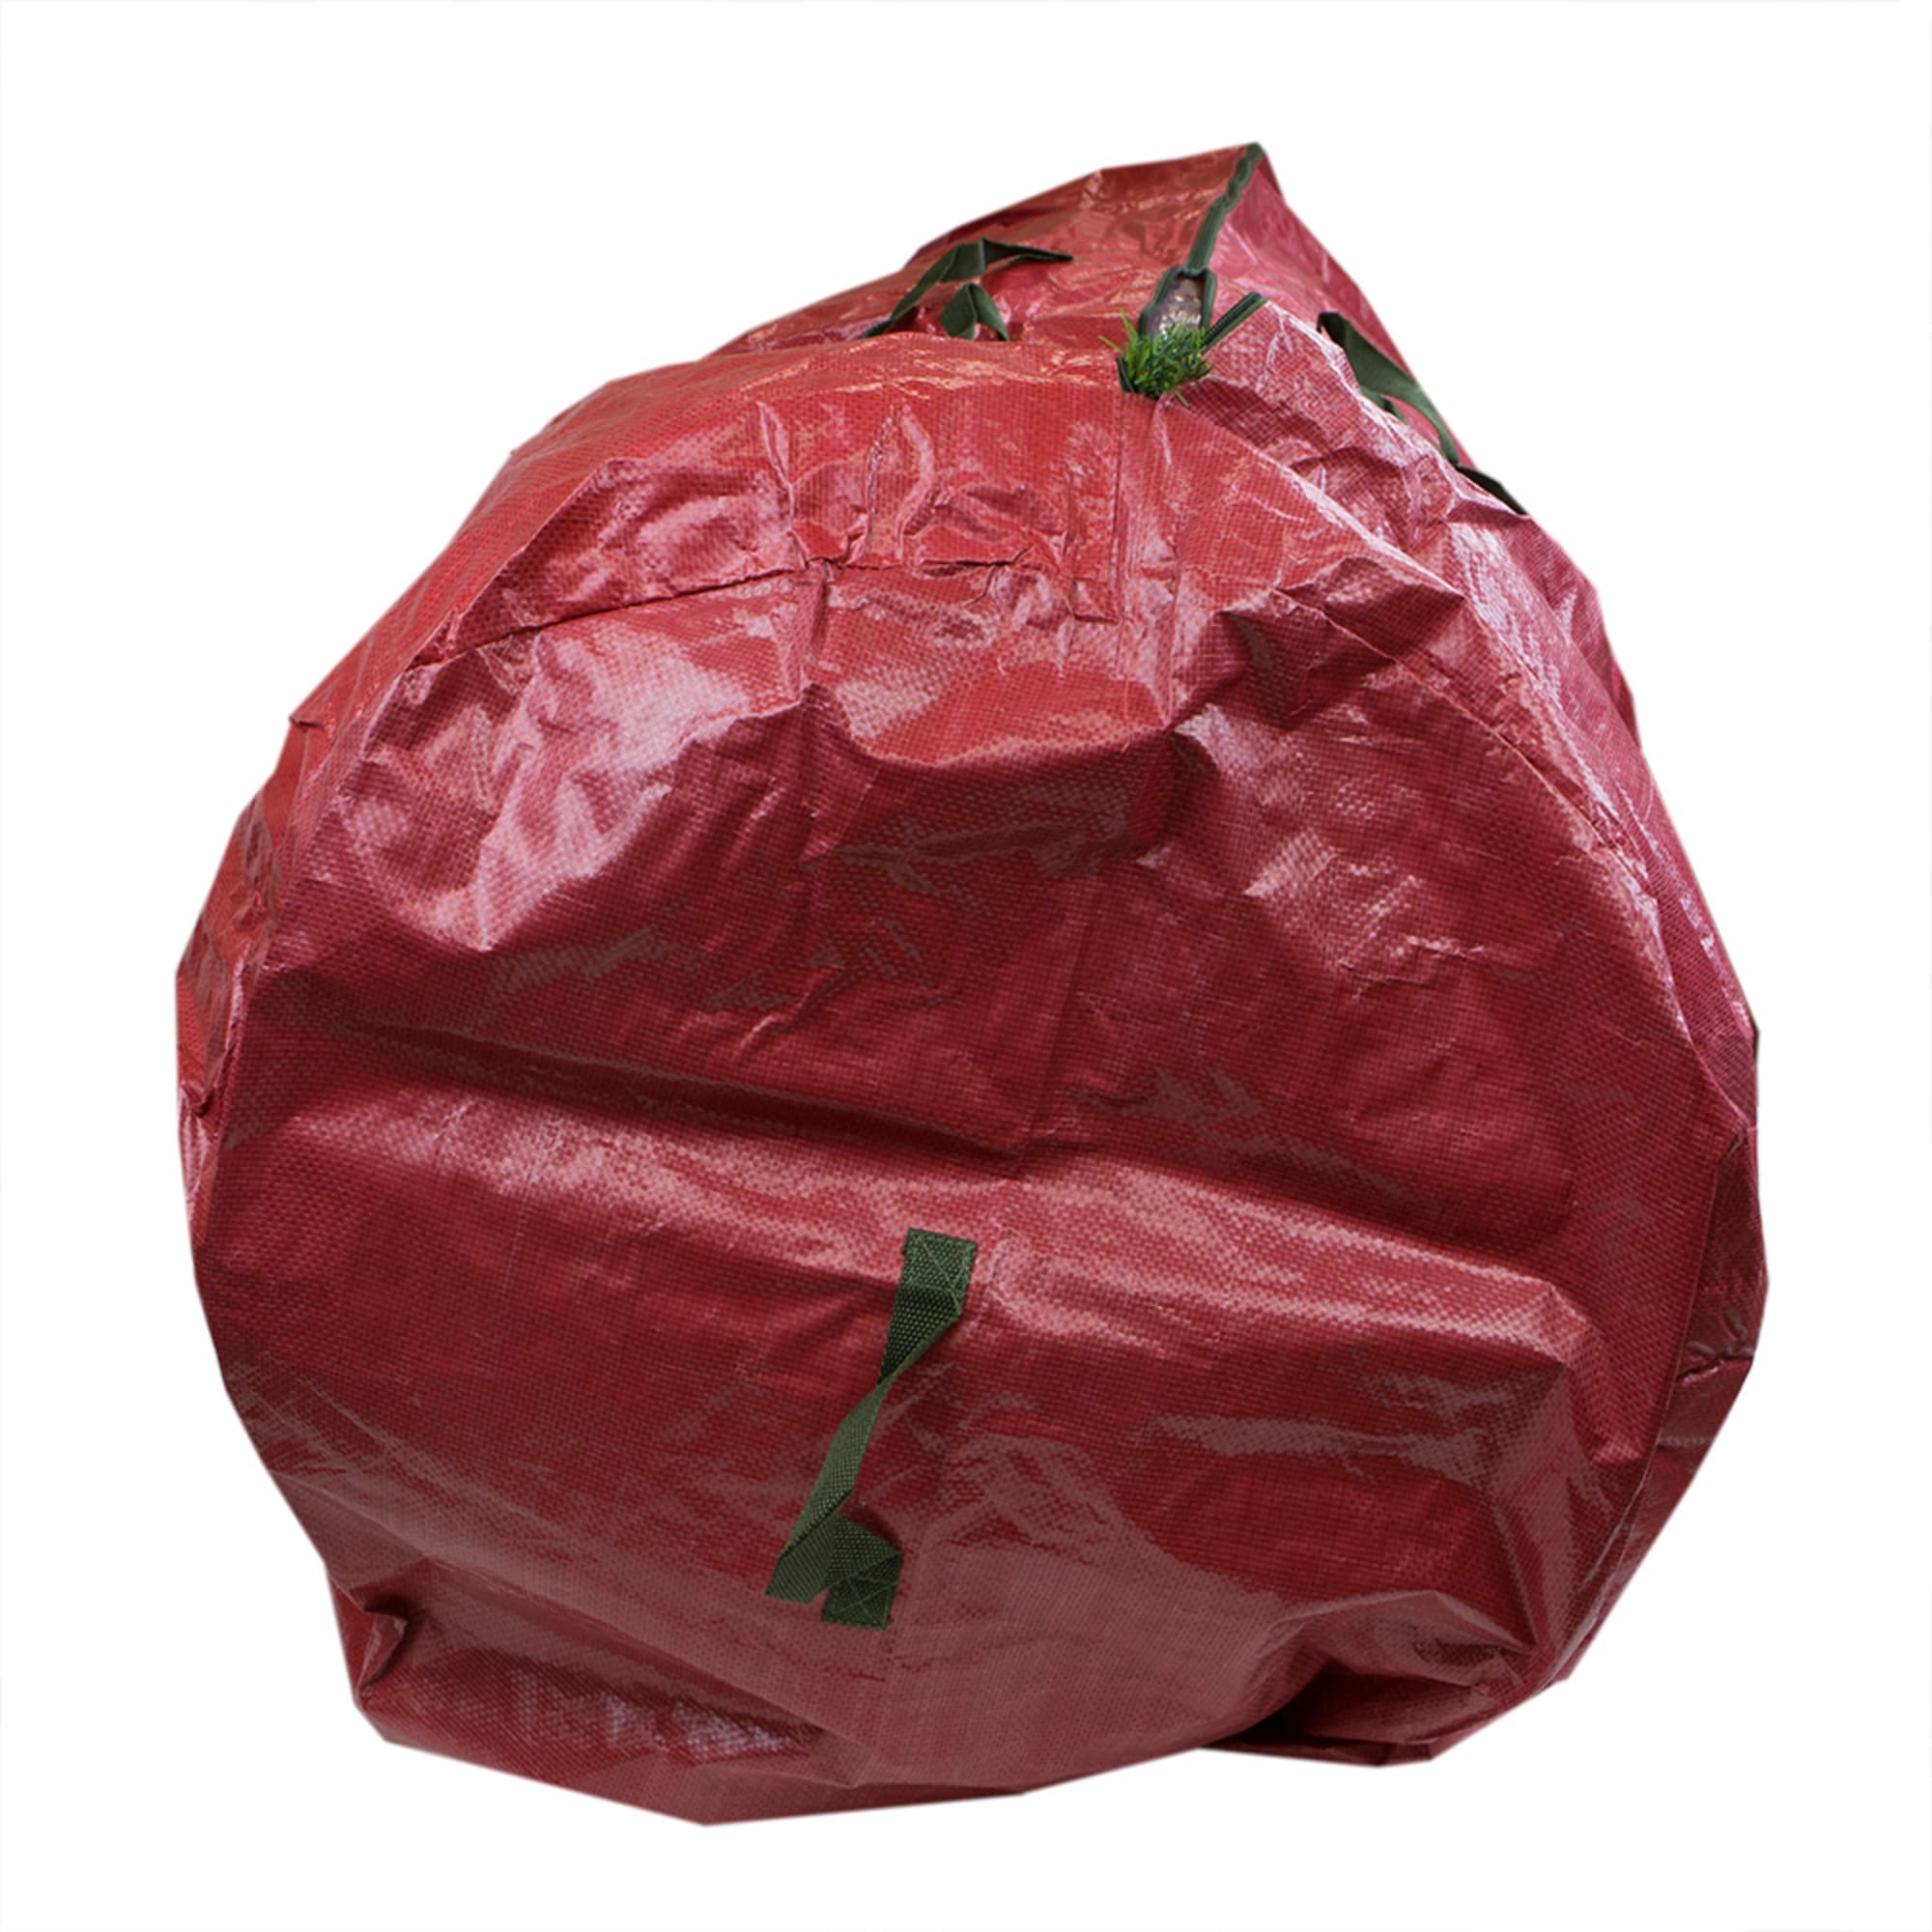 Home Basics Christmas Tree Storage Bag,  Red $10.00 EACH, CASE PACK OF 12